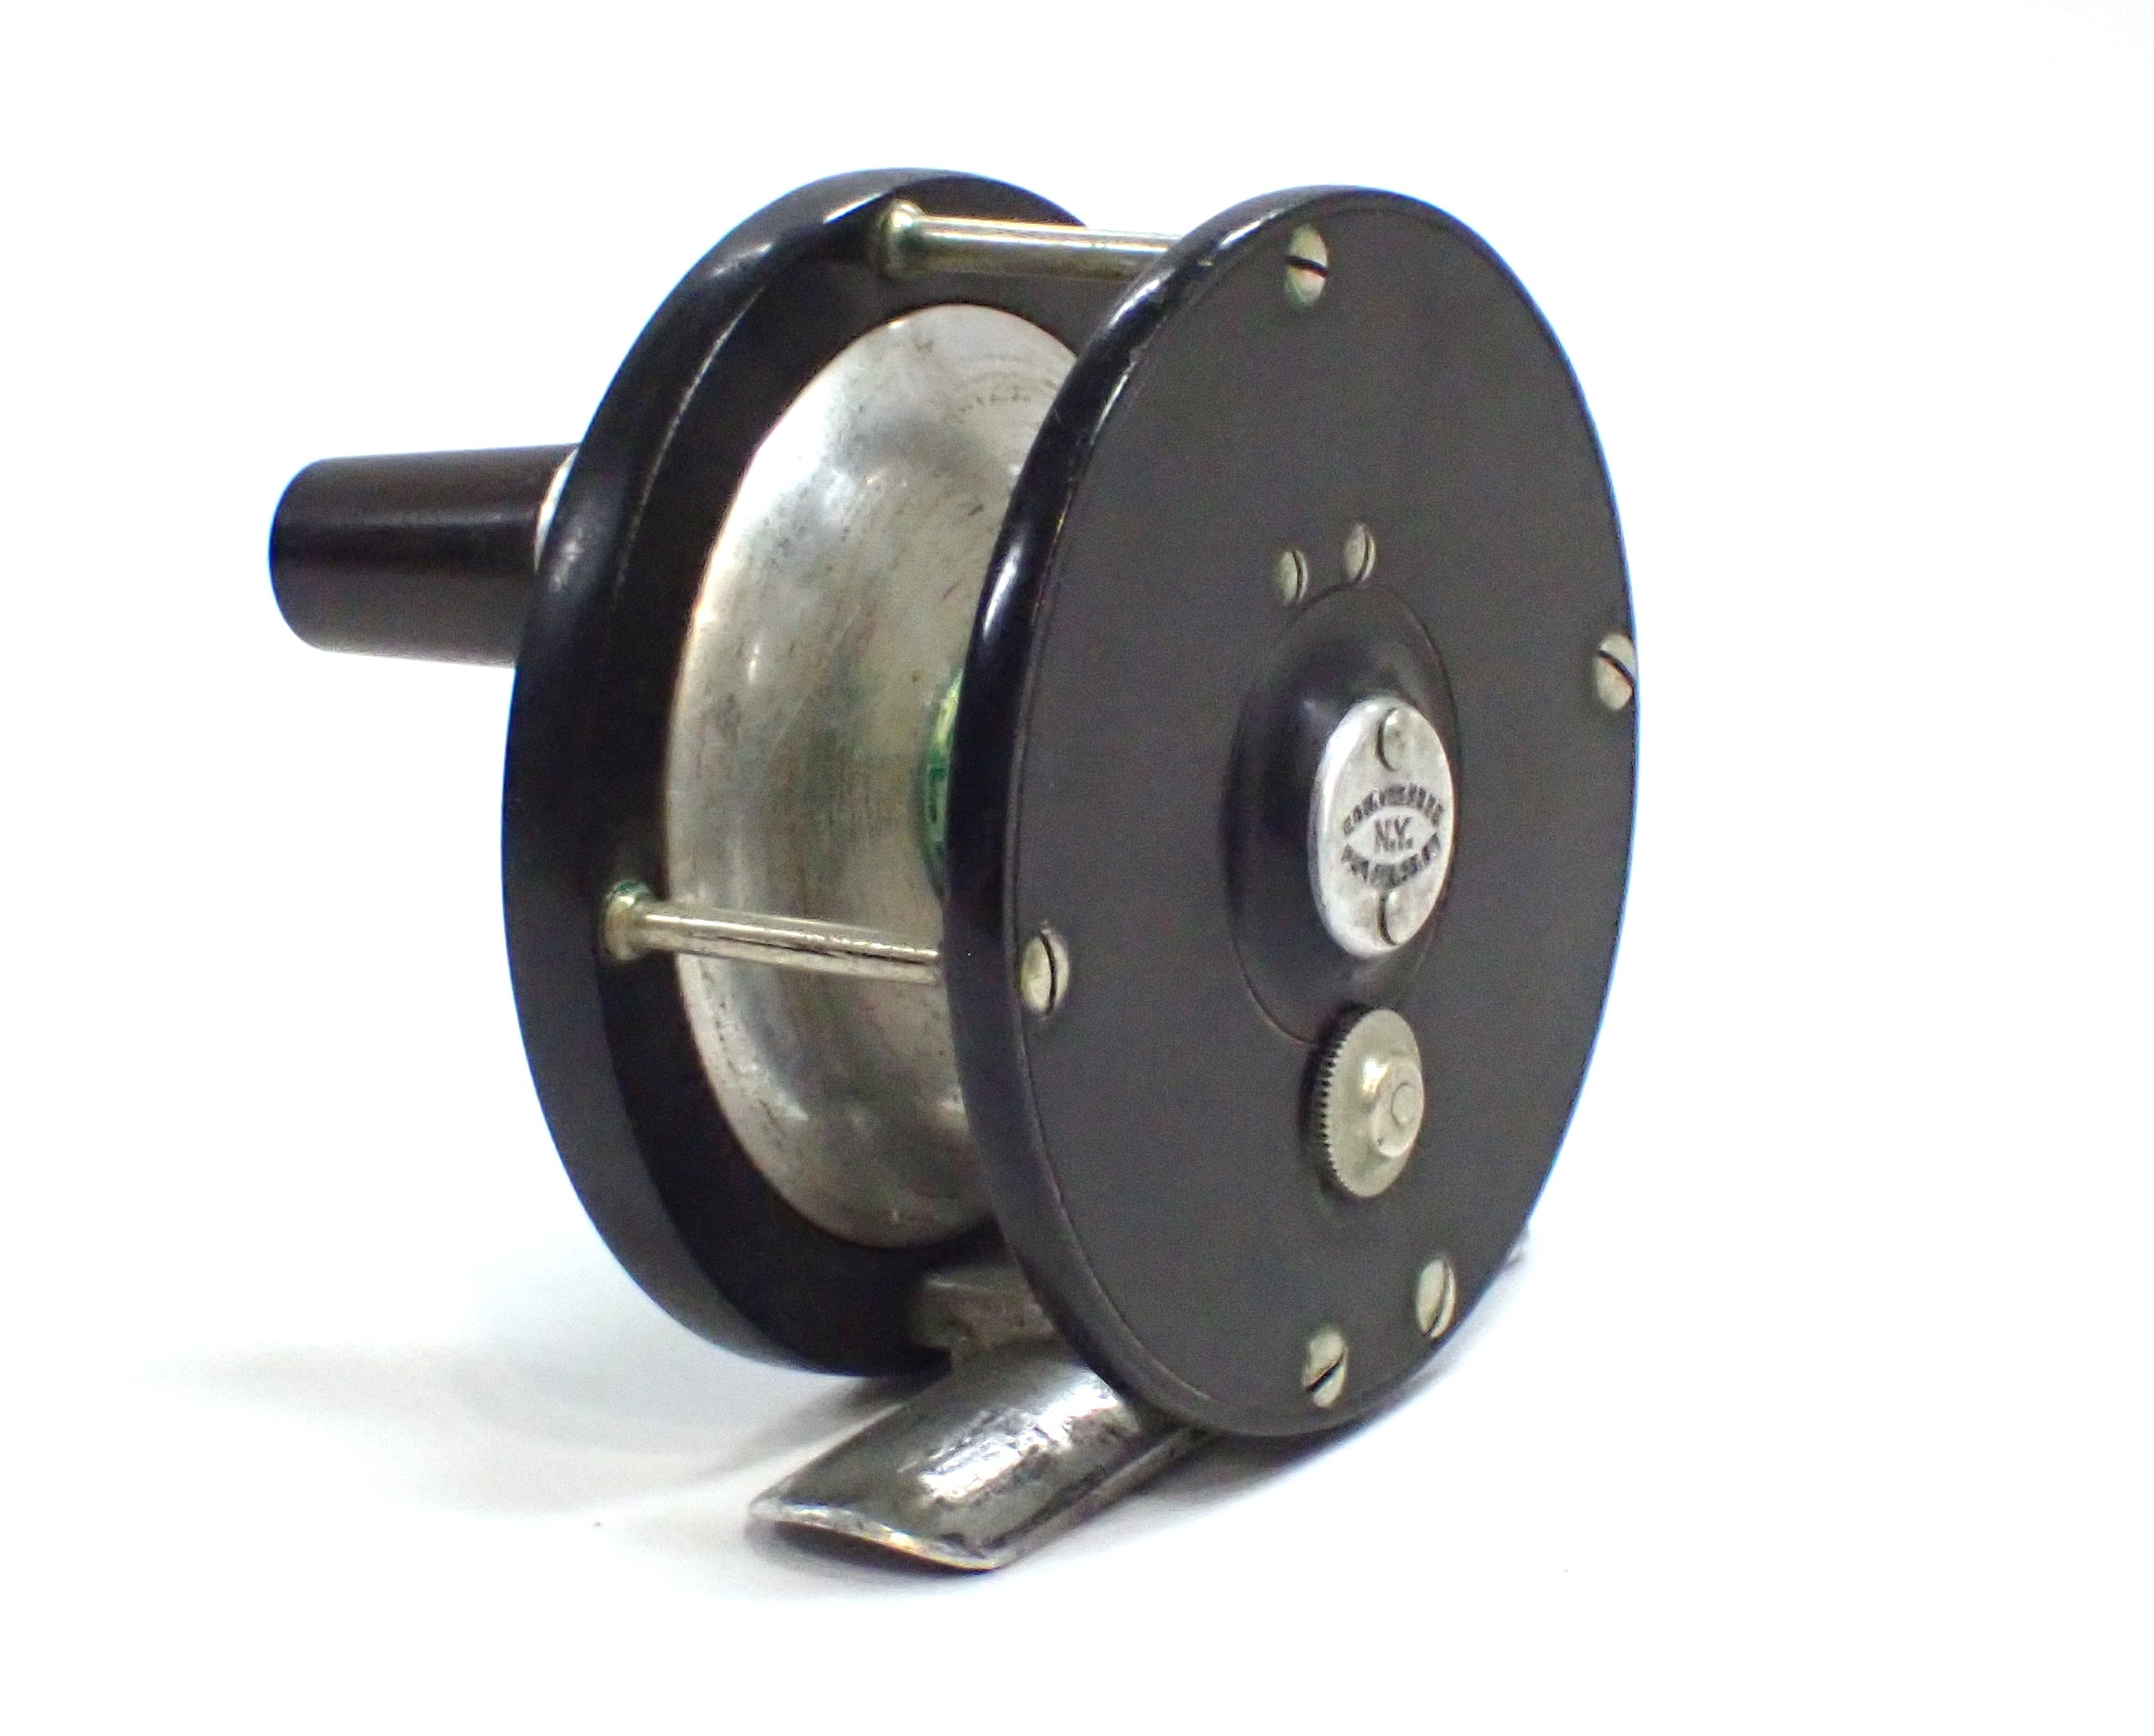 Sold at Auction: (2) Vintage Fly Reels Feat. Martin Auto Fly Reel, martin  automatic fly reel